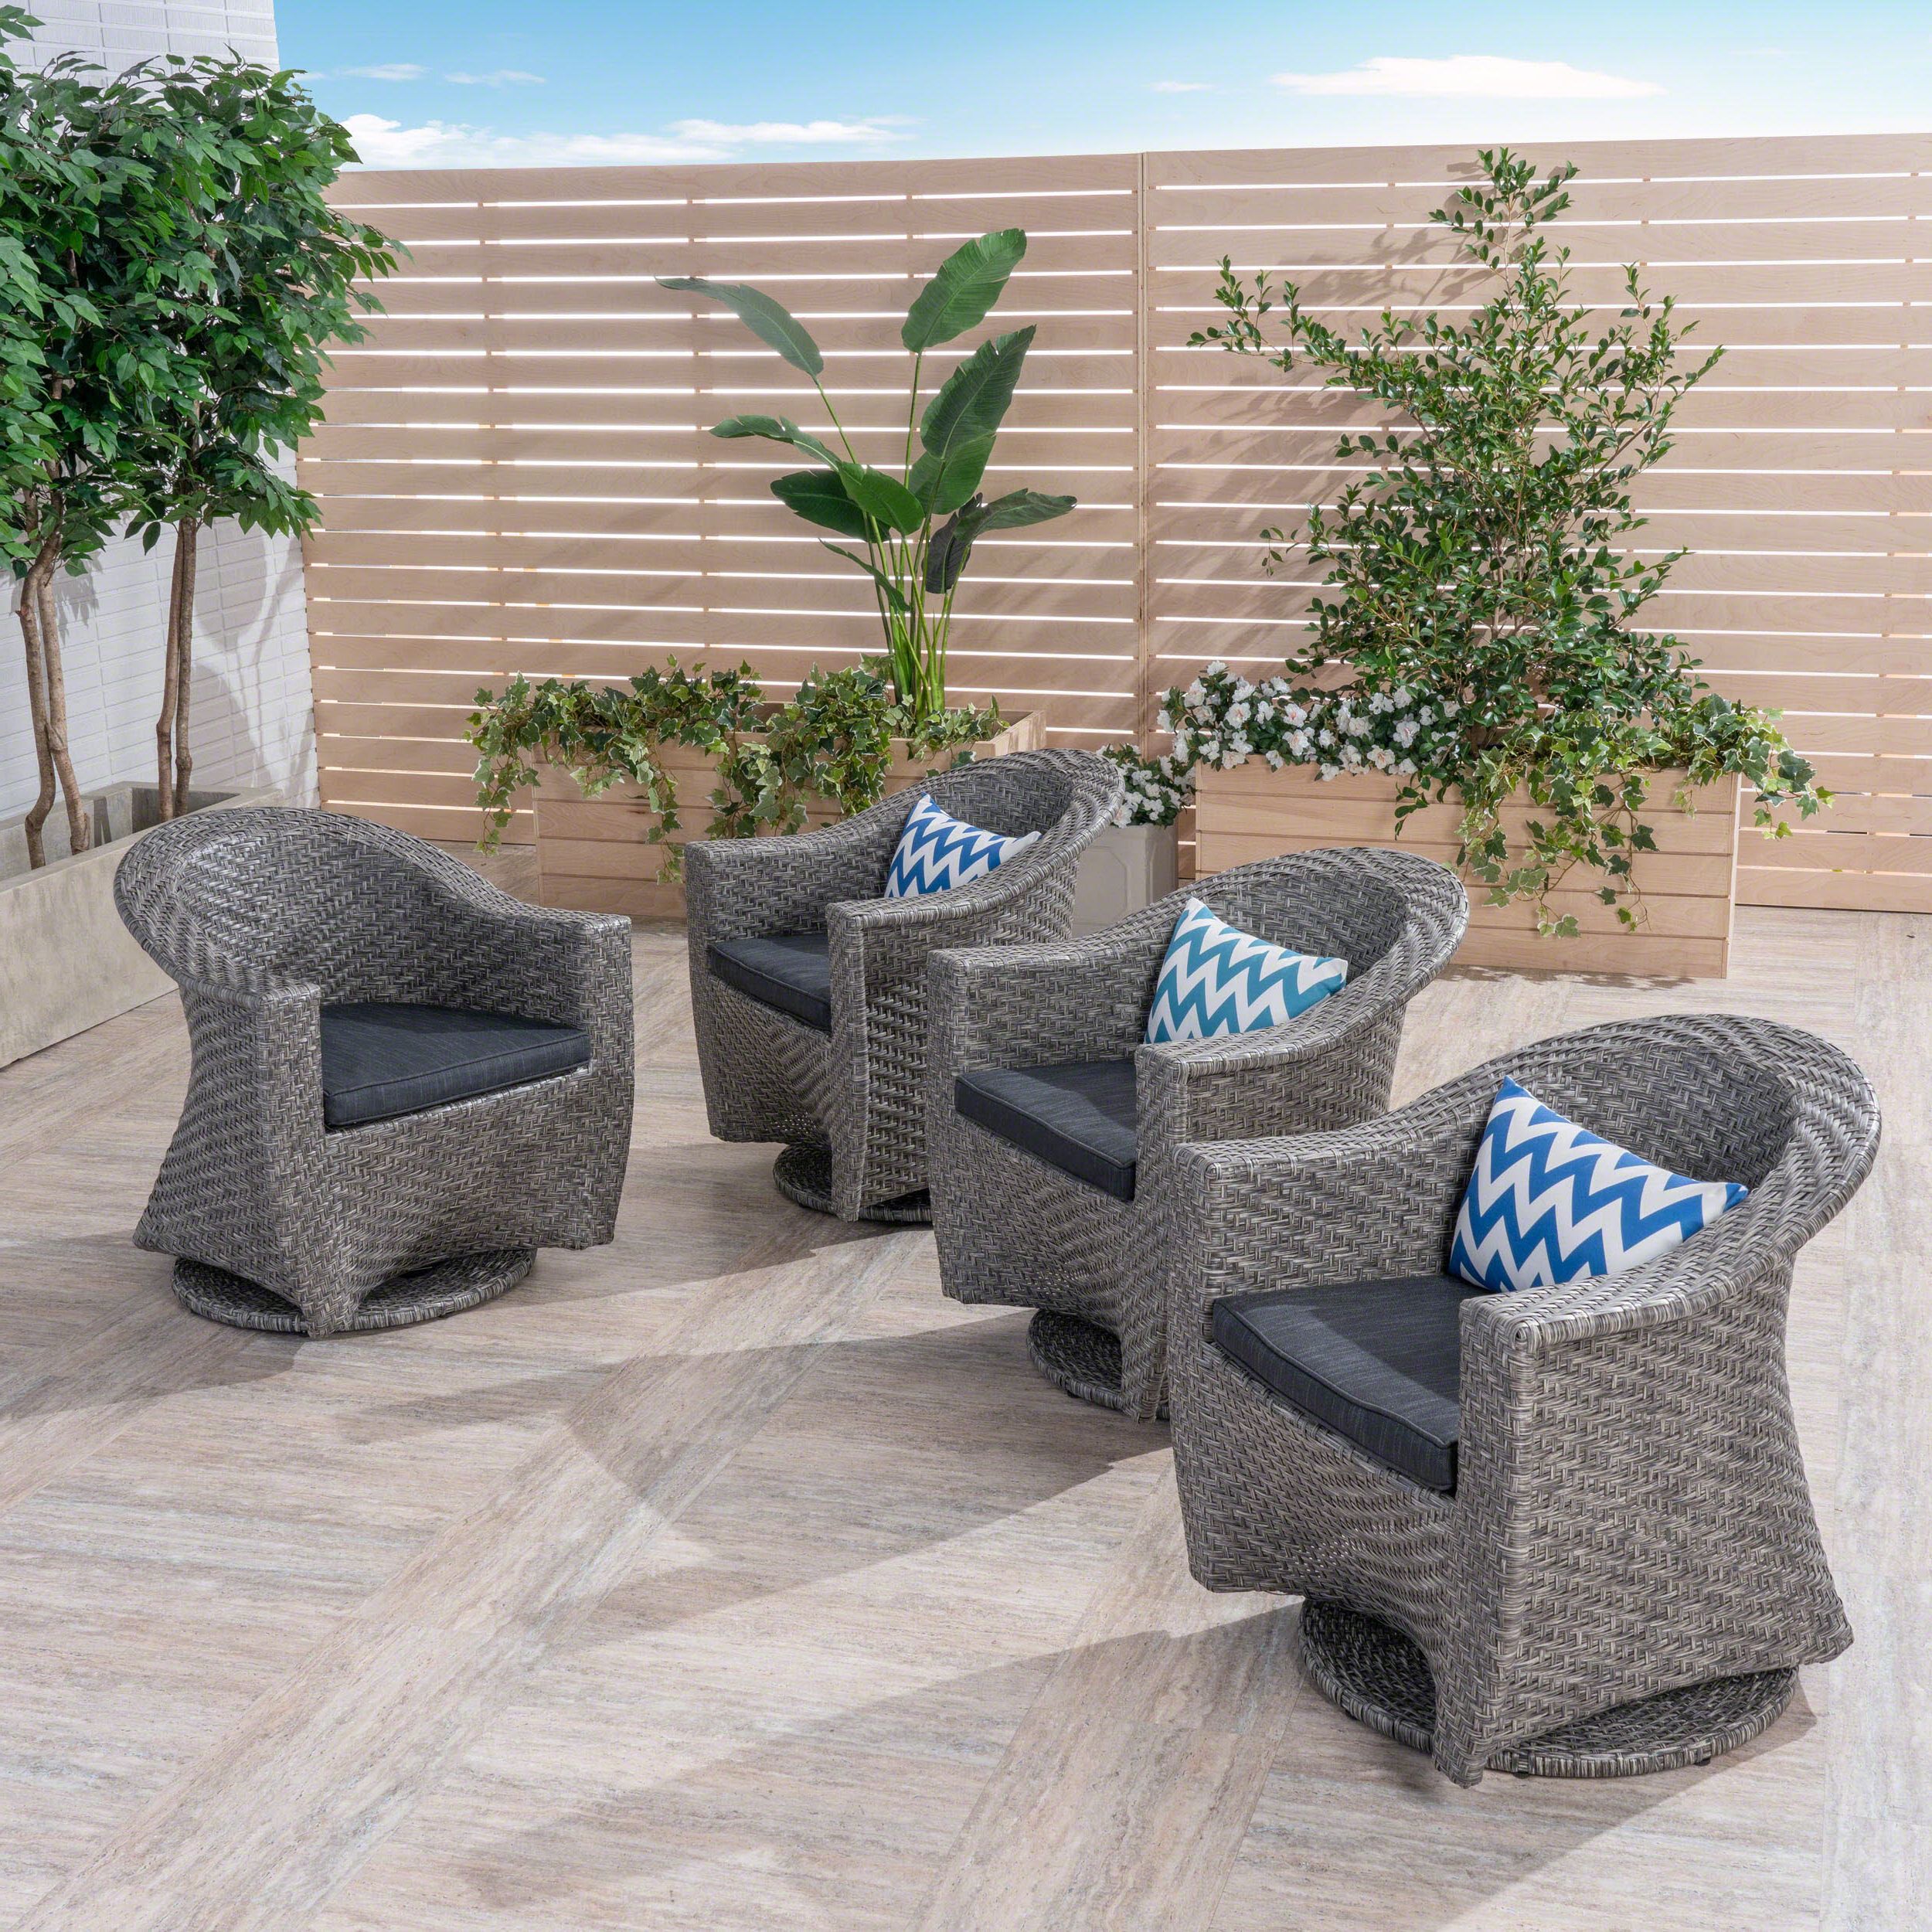 Dark Brown Patio Chairs With Cushions For 2019 Mackenzie Outdoor Swivel Wicker Chairs With Cushions, Set Of 4, Mixed (View 9 of 15)